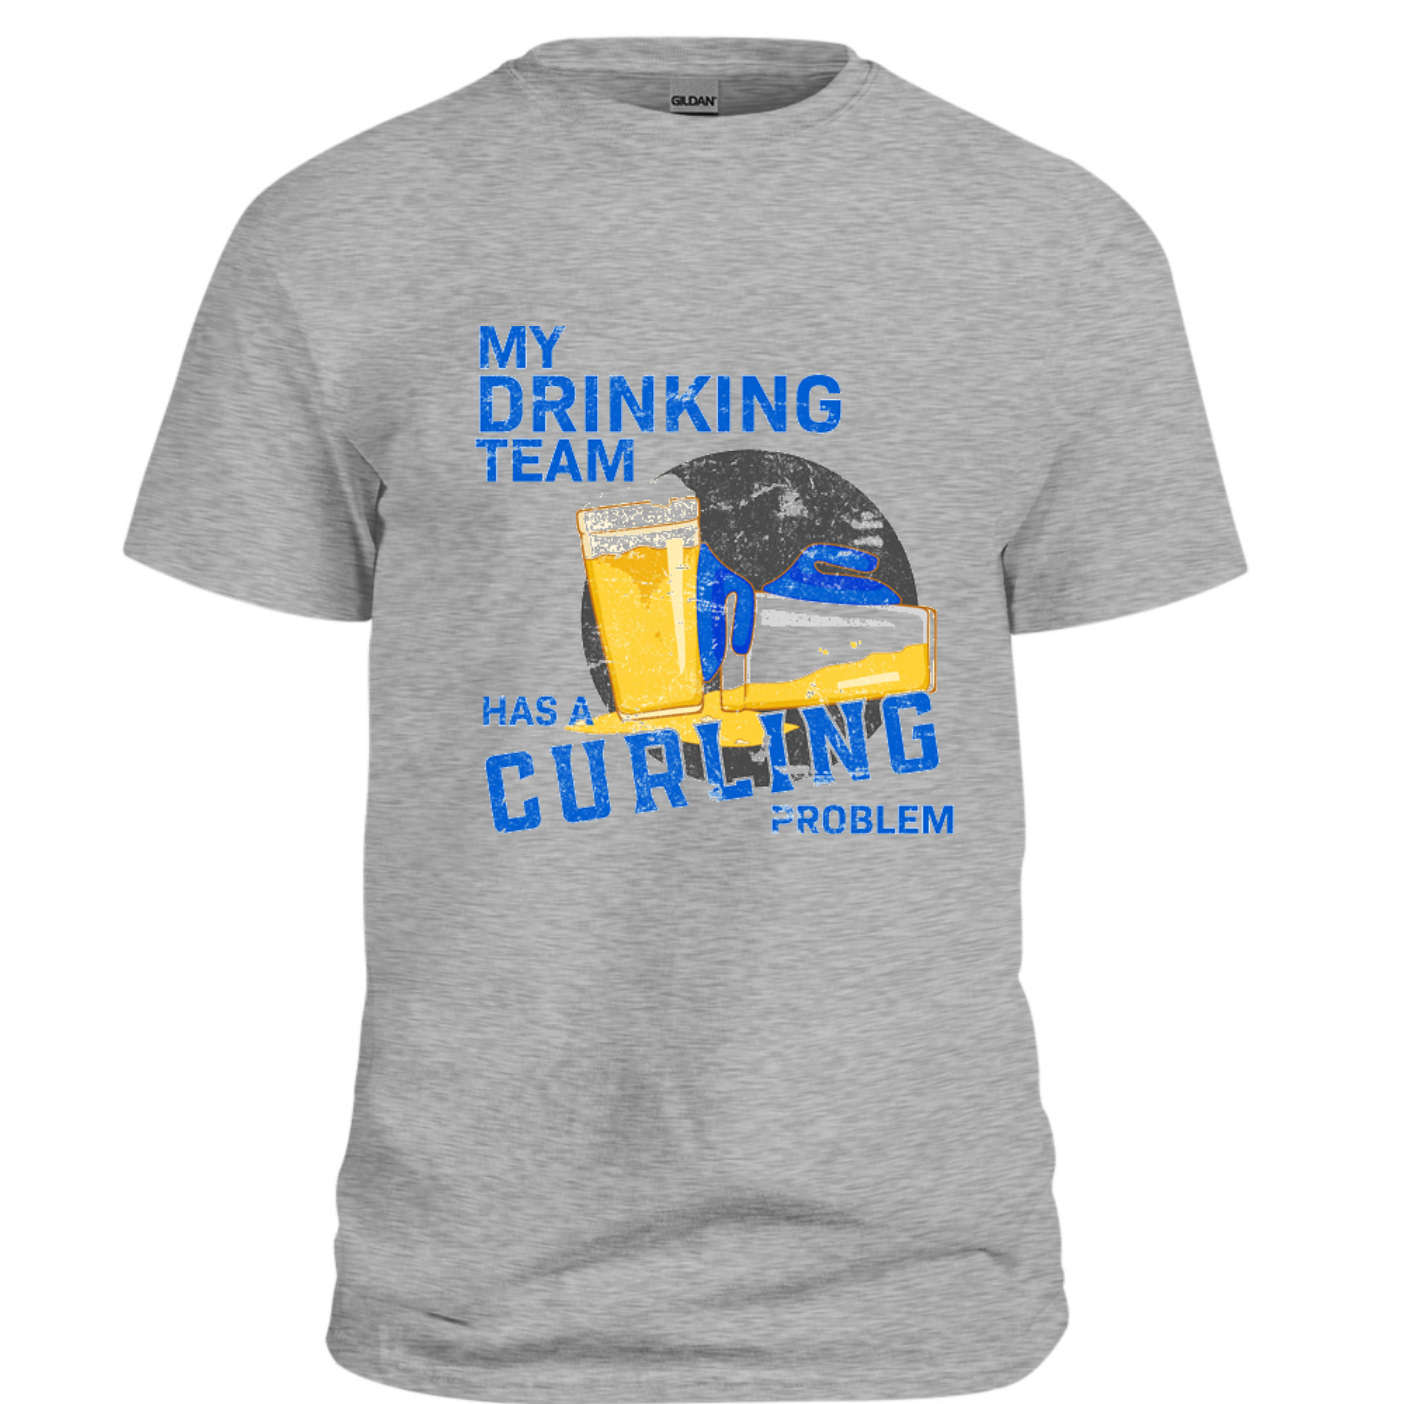 My Drinking Team Has a Curling Problem T-Shirt